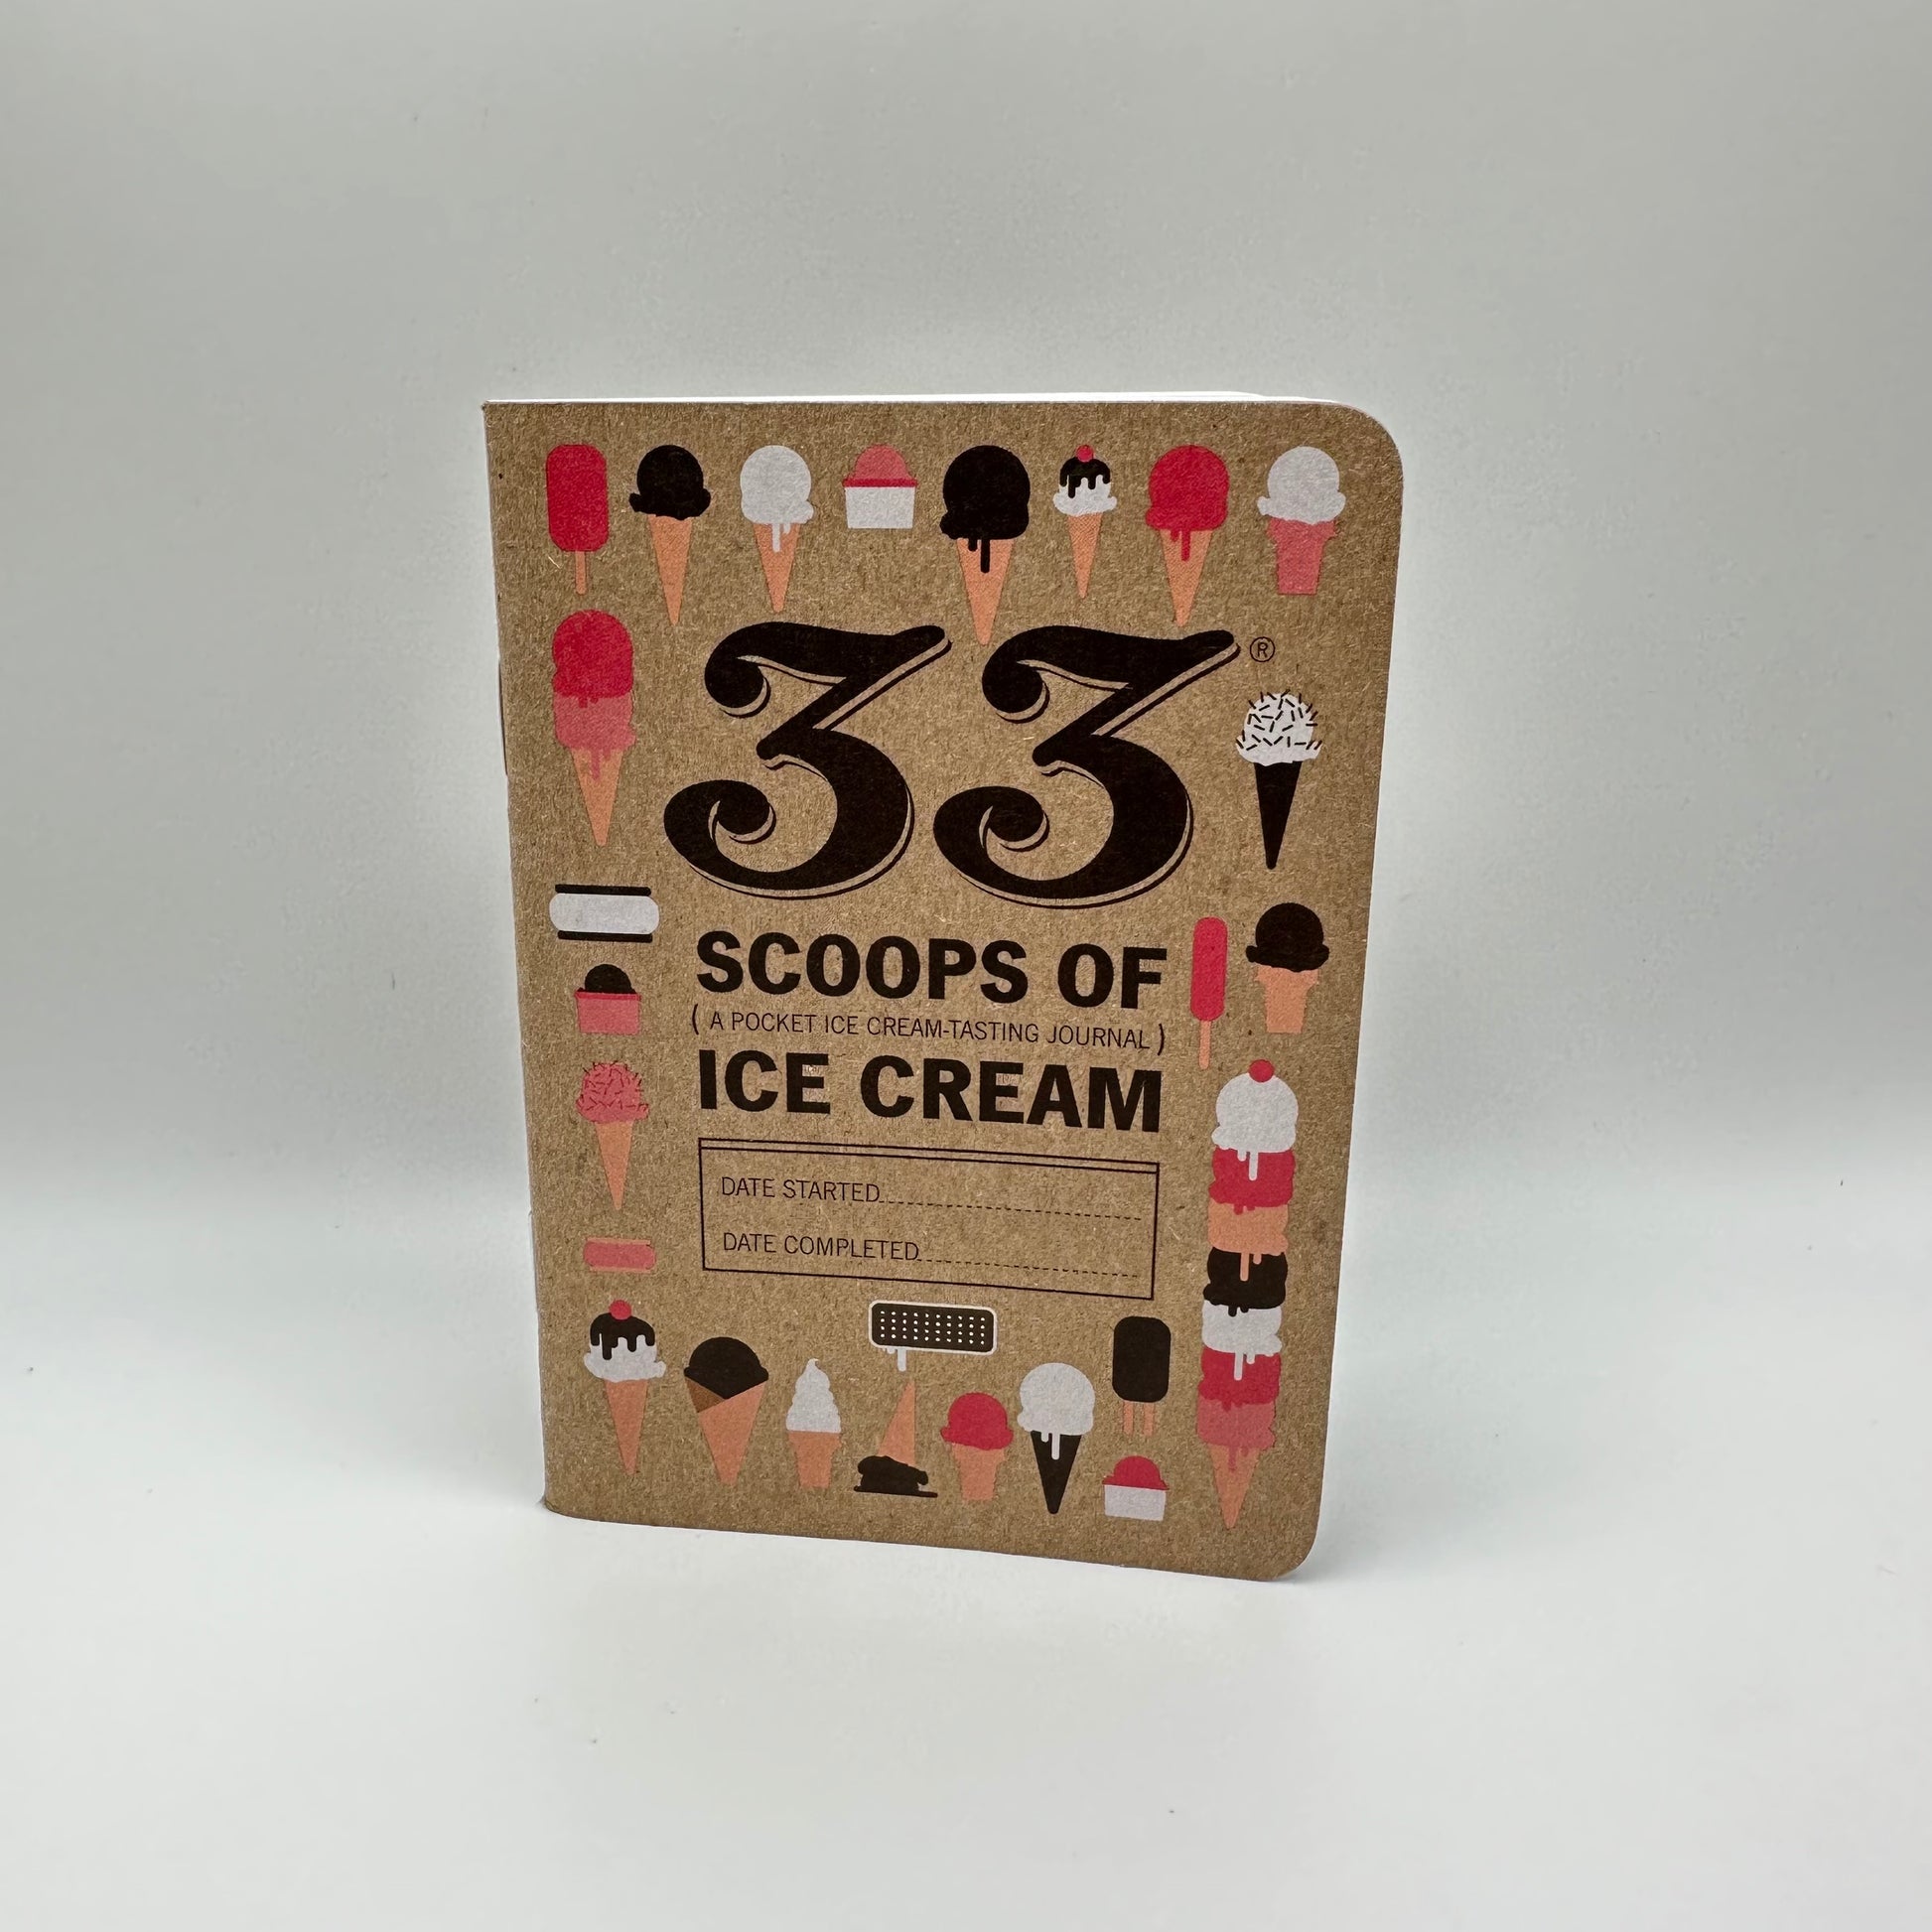 Cover of 33 Scoops of Ice Cream, a pocket ice cream tasting journal. A selection of different ice creams adorn the cover.